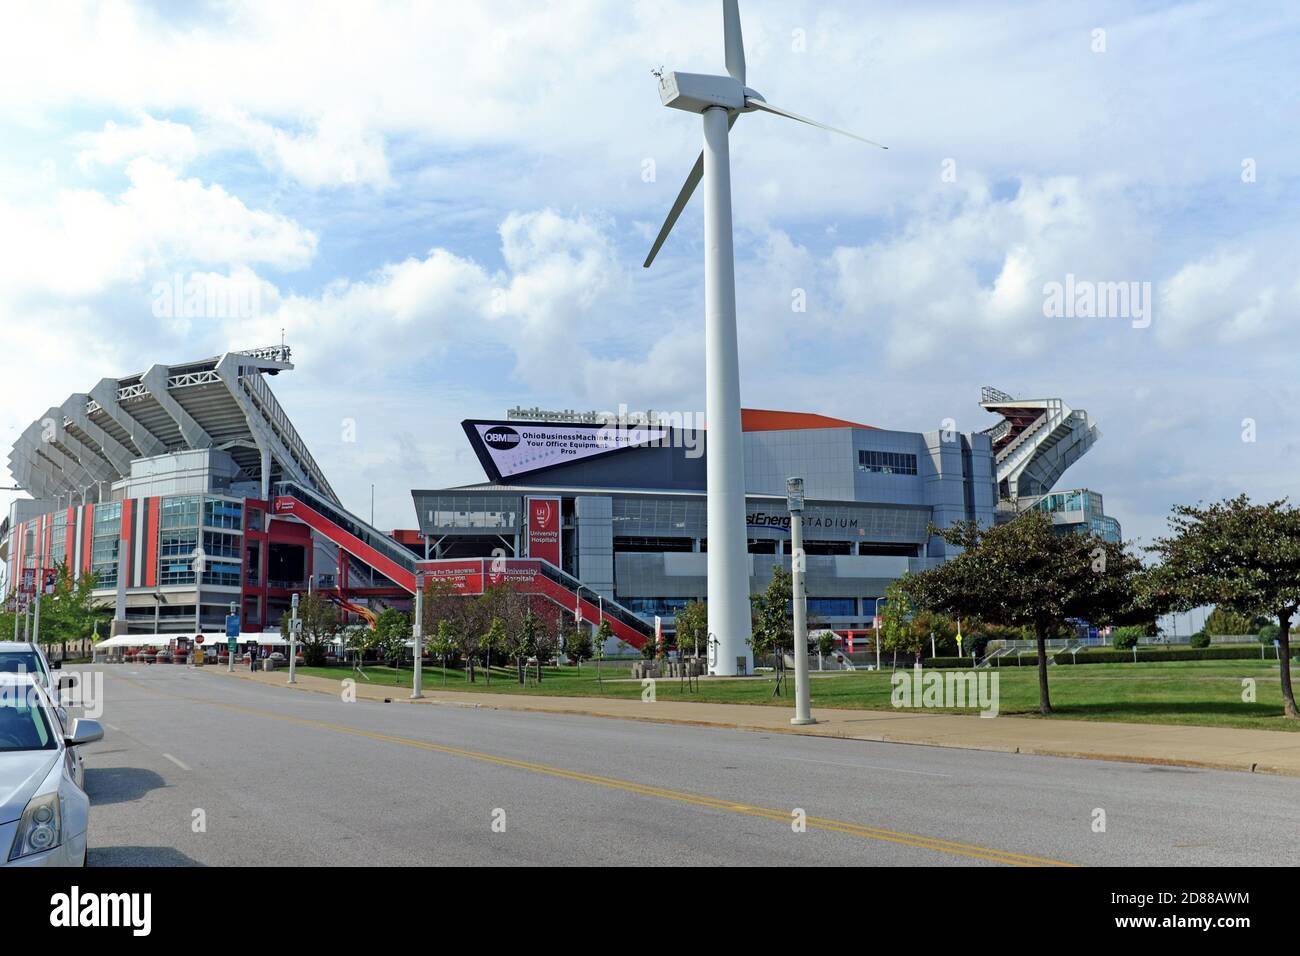 Lakefront attractions in Cleveland, Ohio includes FirstEnergy Stadium and a working giant wind turbine in front of the Great Lakes Science Center. Stock Photo